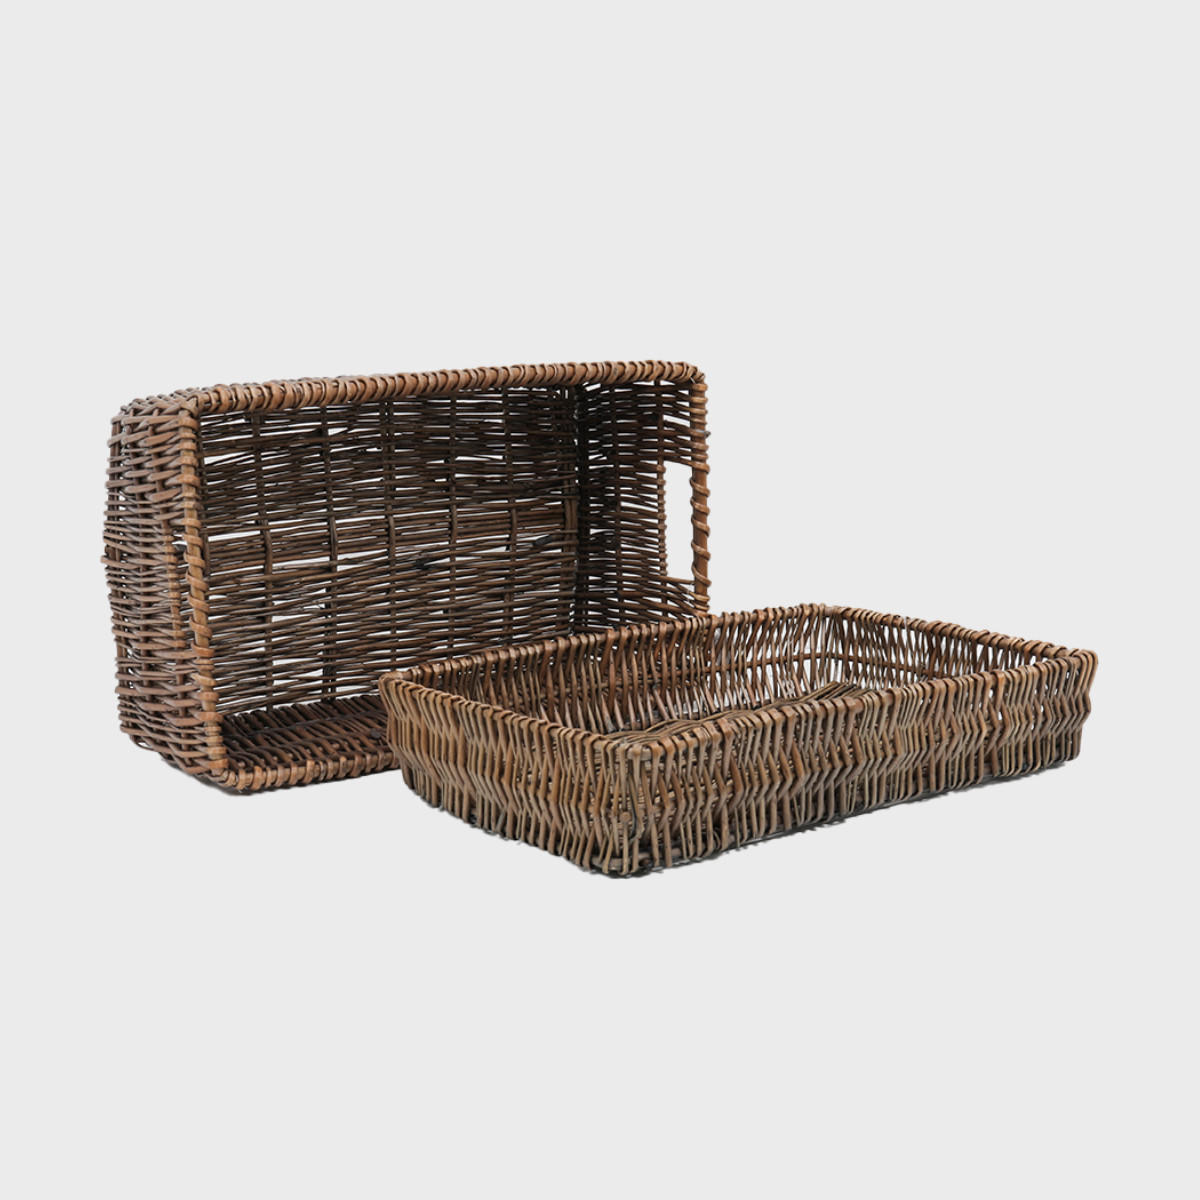 Chatto Wicker Basket in Pewter Brown - 300mm Wide (pk 1)  CHATP300